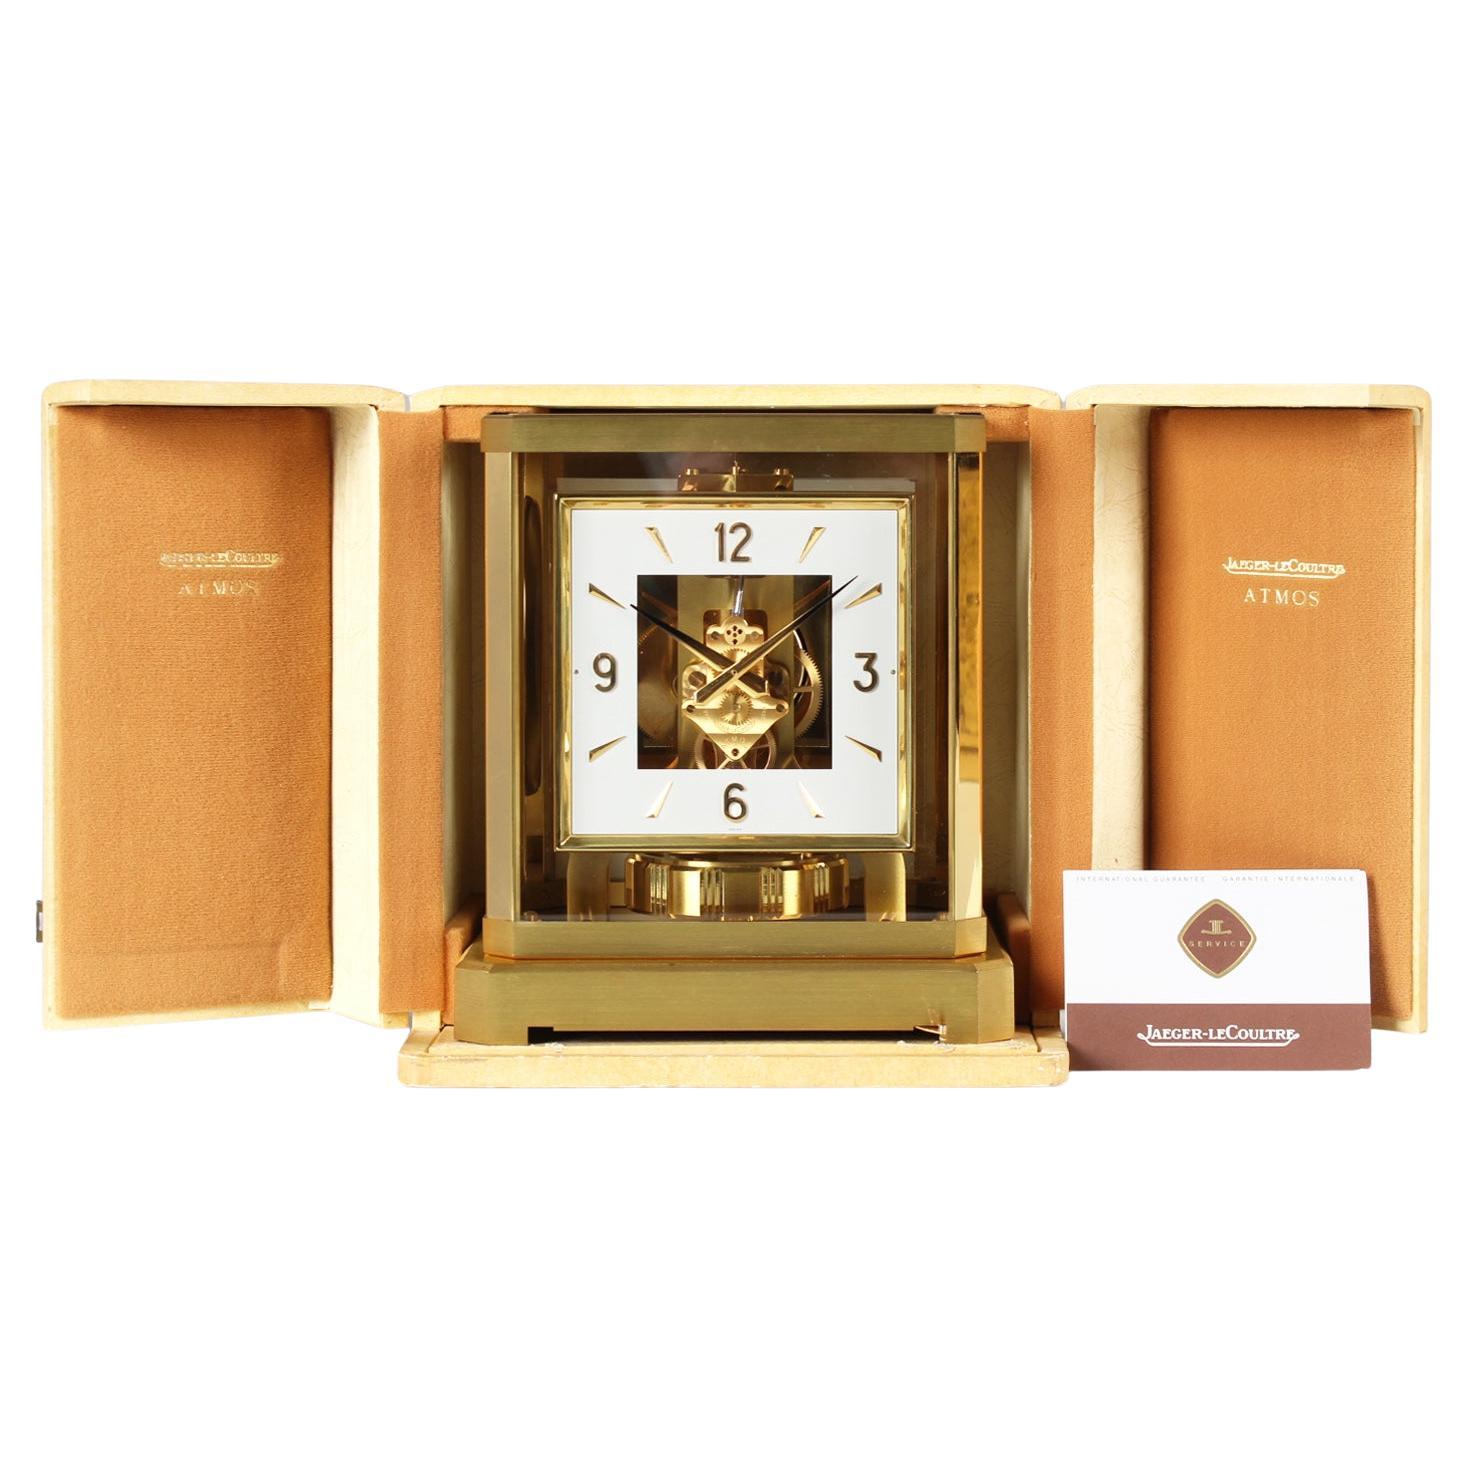 Manufactured 1962 Jaeger Lecoultre Atmos Clock with Square Dial, Fullset